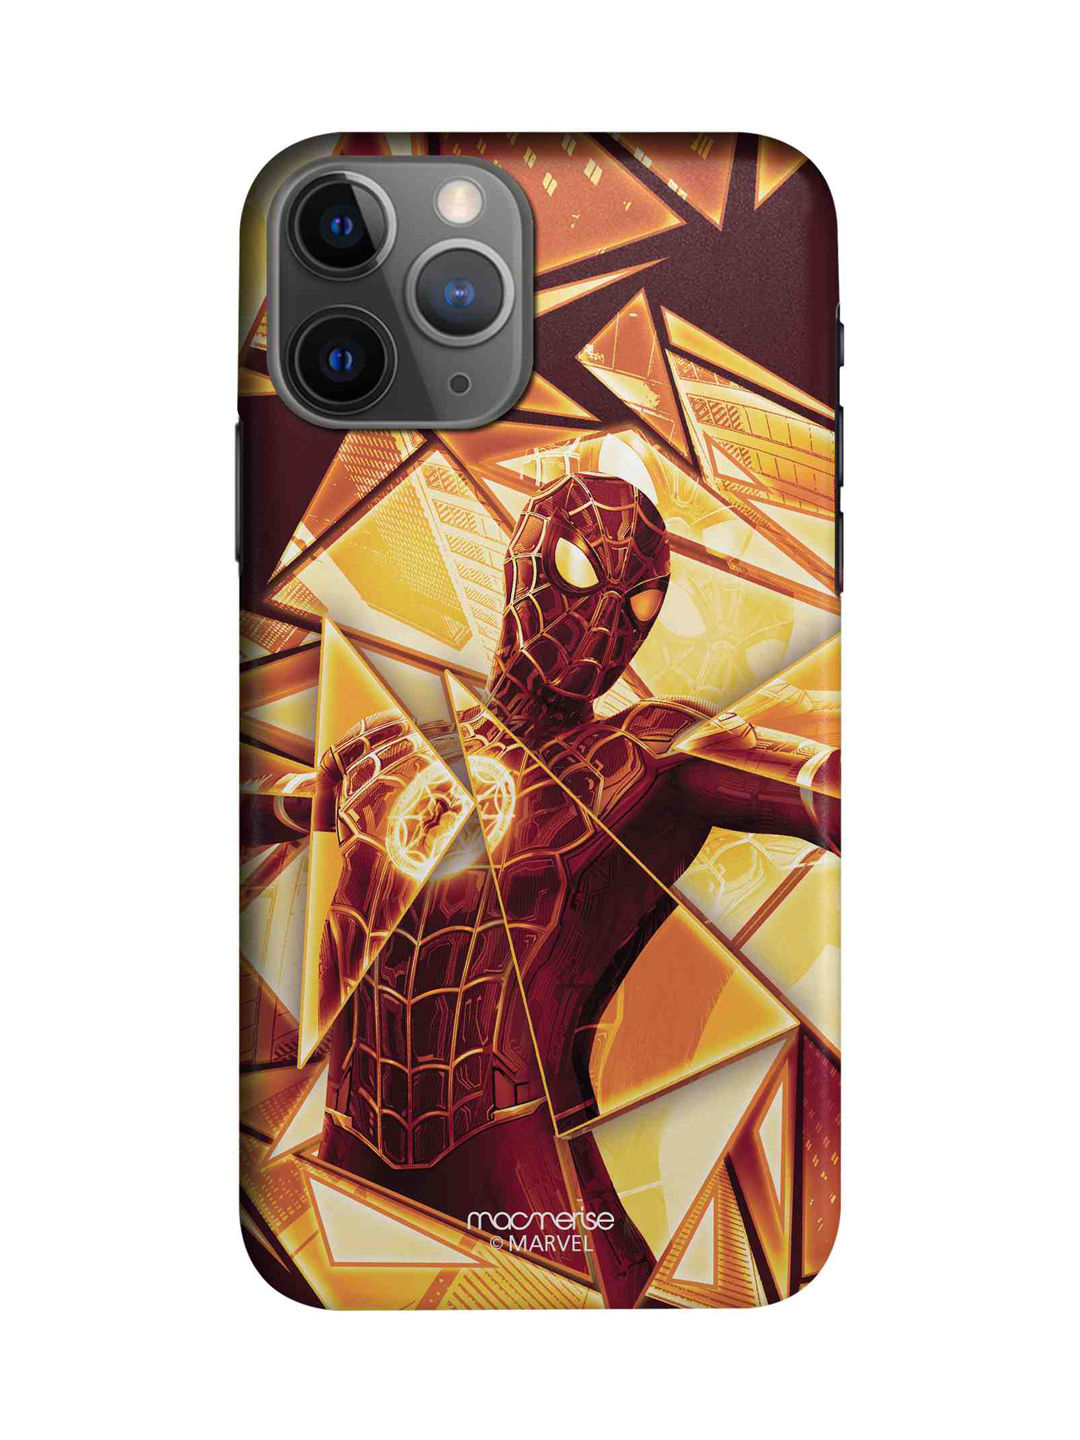 Buy Shattered Dimension Spidey Macmerise Sleek Case Cover For Iphone 11 Pro Max Online